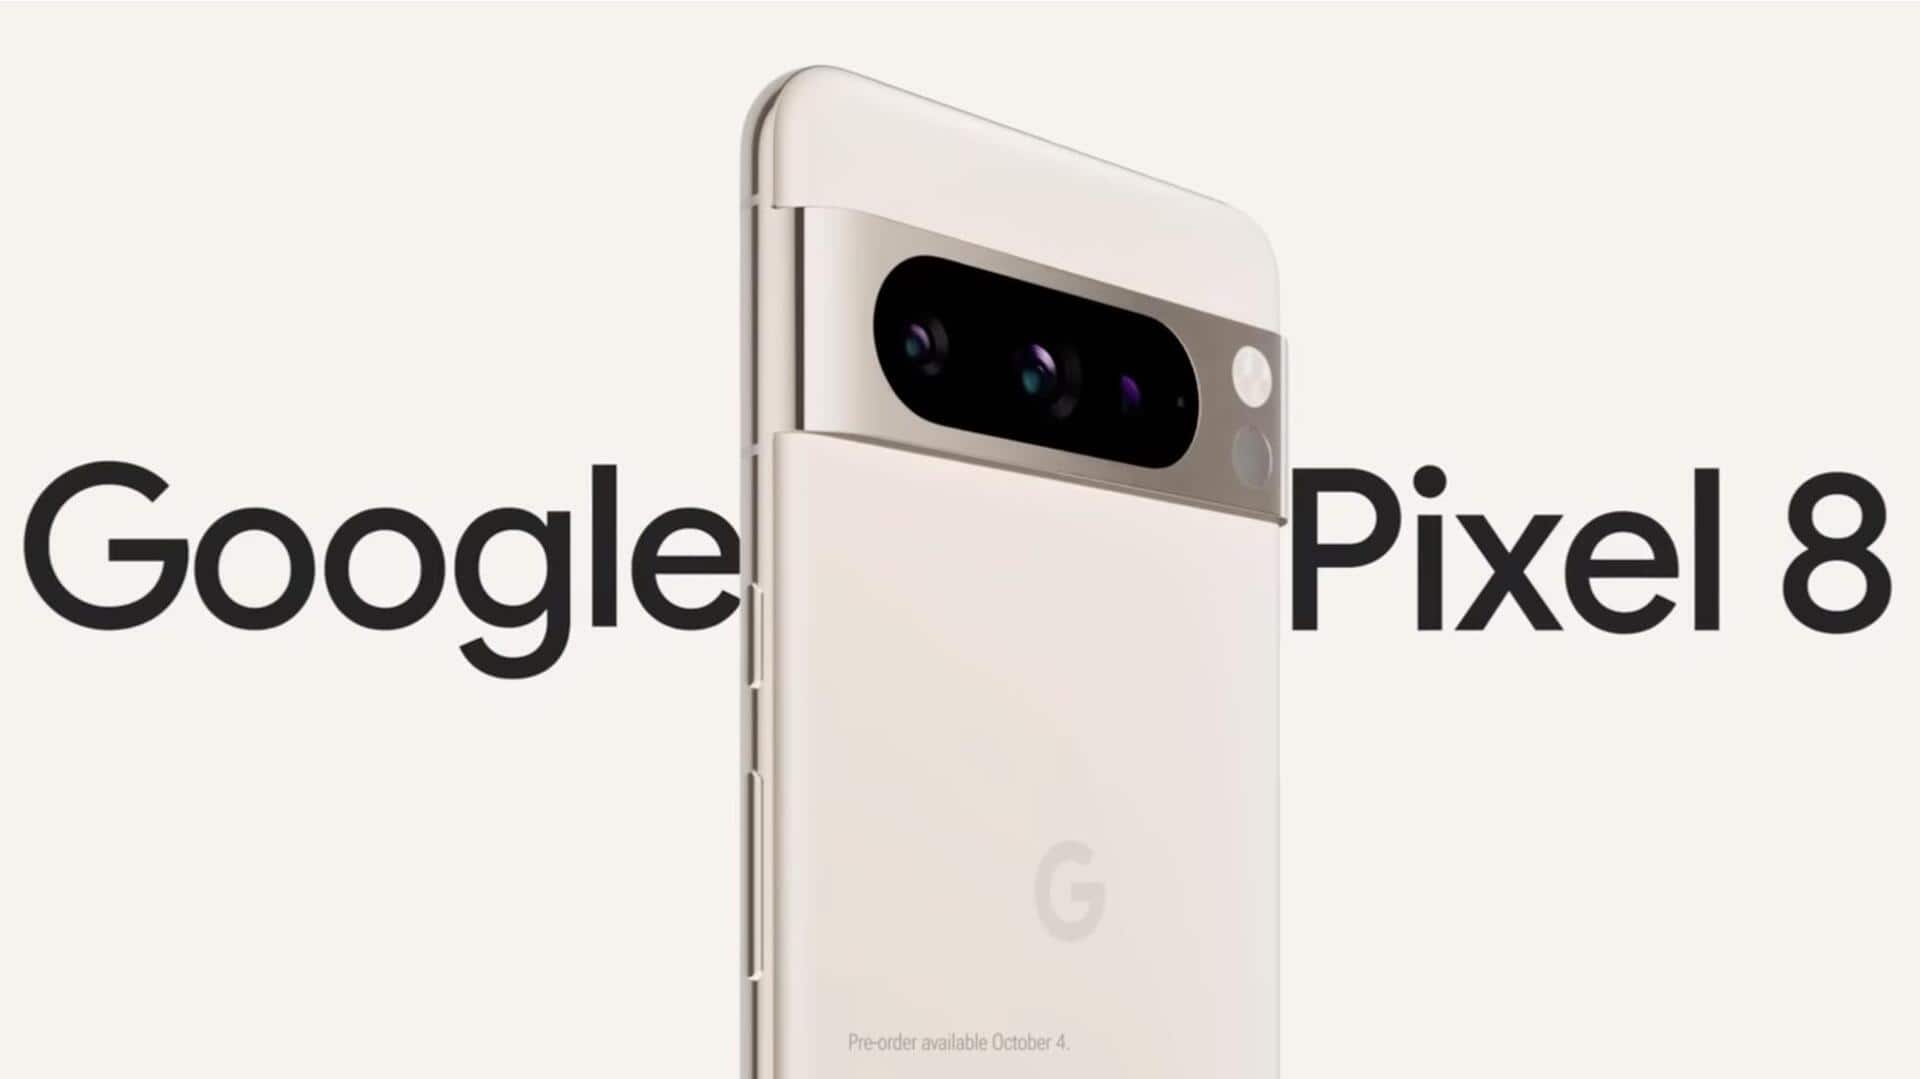 Google Pixel 2023 launch event tomorrow: What to expect